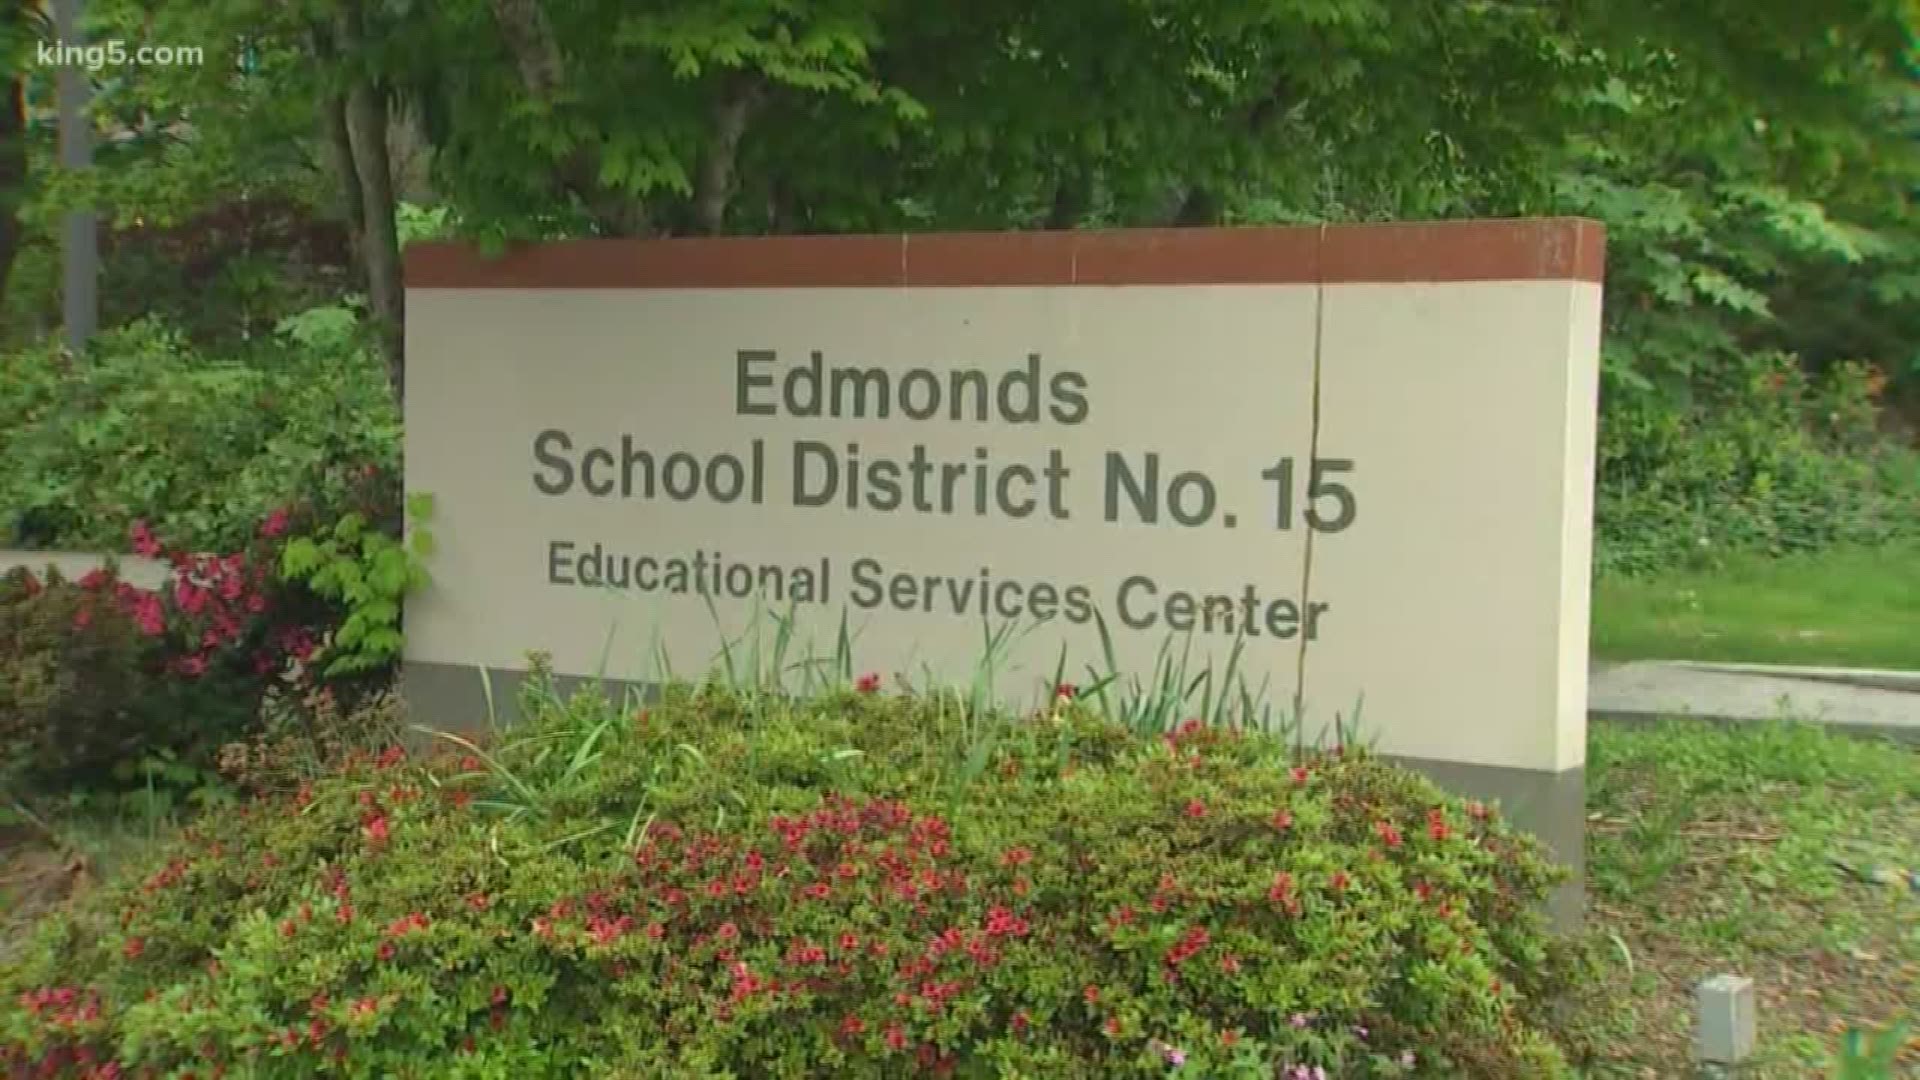 The Edmonds School District is facing some tough decisions, including cutting staff, which could mean sending pink slips to more than 40 people.